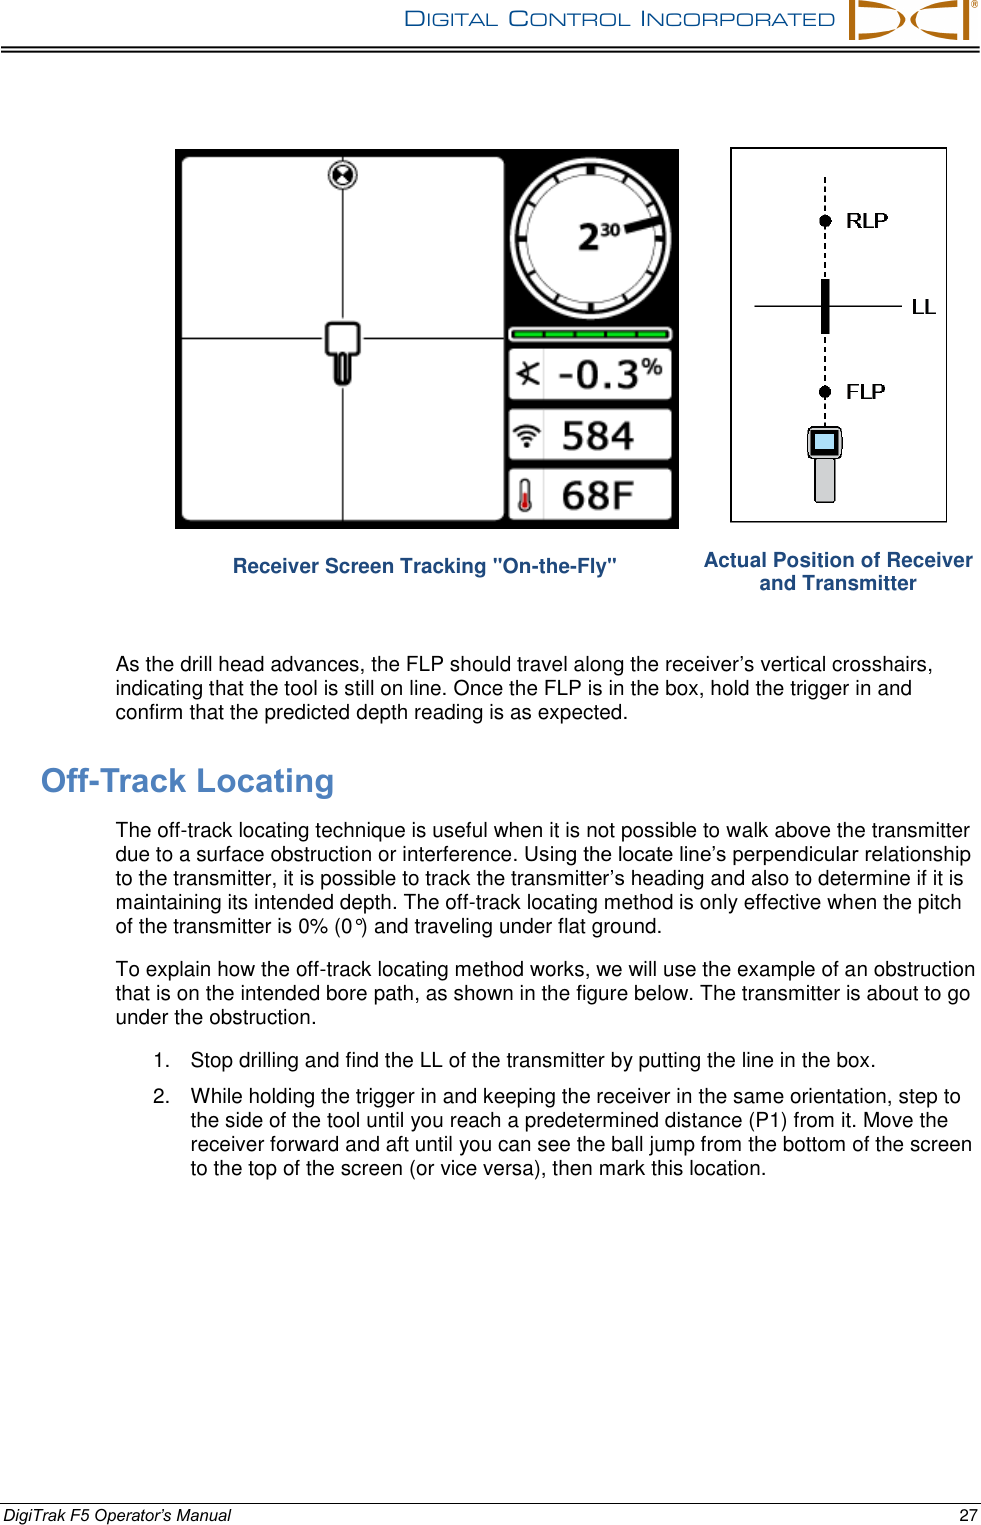 DIGITAL  CONTROL  INCORPORATED      DigiTrak F5 Operator’s Manual 27  Receiver Screen Tracking &quot;On-the-Fly&quot;  Actual Position of Receiver and Transmitter As the drill head advances, the FLP should travel along the receiver’s vertical crosshairs, indicating that the tool is still on line. Once the FLP is in the box, hold the trigger in and confirm that the predicted depth reading is as expected.  Off-Track Locating The off-track locating technique is useful when it is not possible to walk above the transmitter due to a surface obstruction or interference. Using the locate line’s perpendicular relationship to the transmitter, it is possible to track the transmitter’s heading and also to determine if it is maintaining its intended depth. The off-track locating method is only effective when the pitch of the transmitter is 0% (0°) and traveling under flat ground. To explain how the off-track locating method works, we will use the example of an obstruction that is on the intended bore path, as shown in the figure below. The transmitter is about to go under the obstruction. 1.  Stop drilling and find the LL of the transmitter by putting the line in the box. 2.  While holding the trigger in and keeping the receiver in the same orientation, step to the side of the tool until you reach a predetermined distance (P1) from it. Move the receiver forward and aft until you can see the ball jump from the bottom of the screen to the top of the screen (or vice versa), then mark this location. 